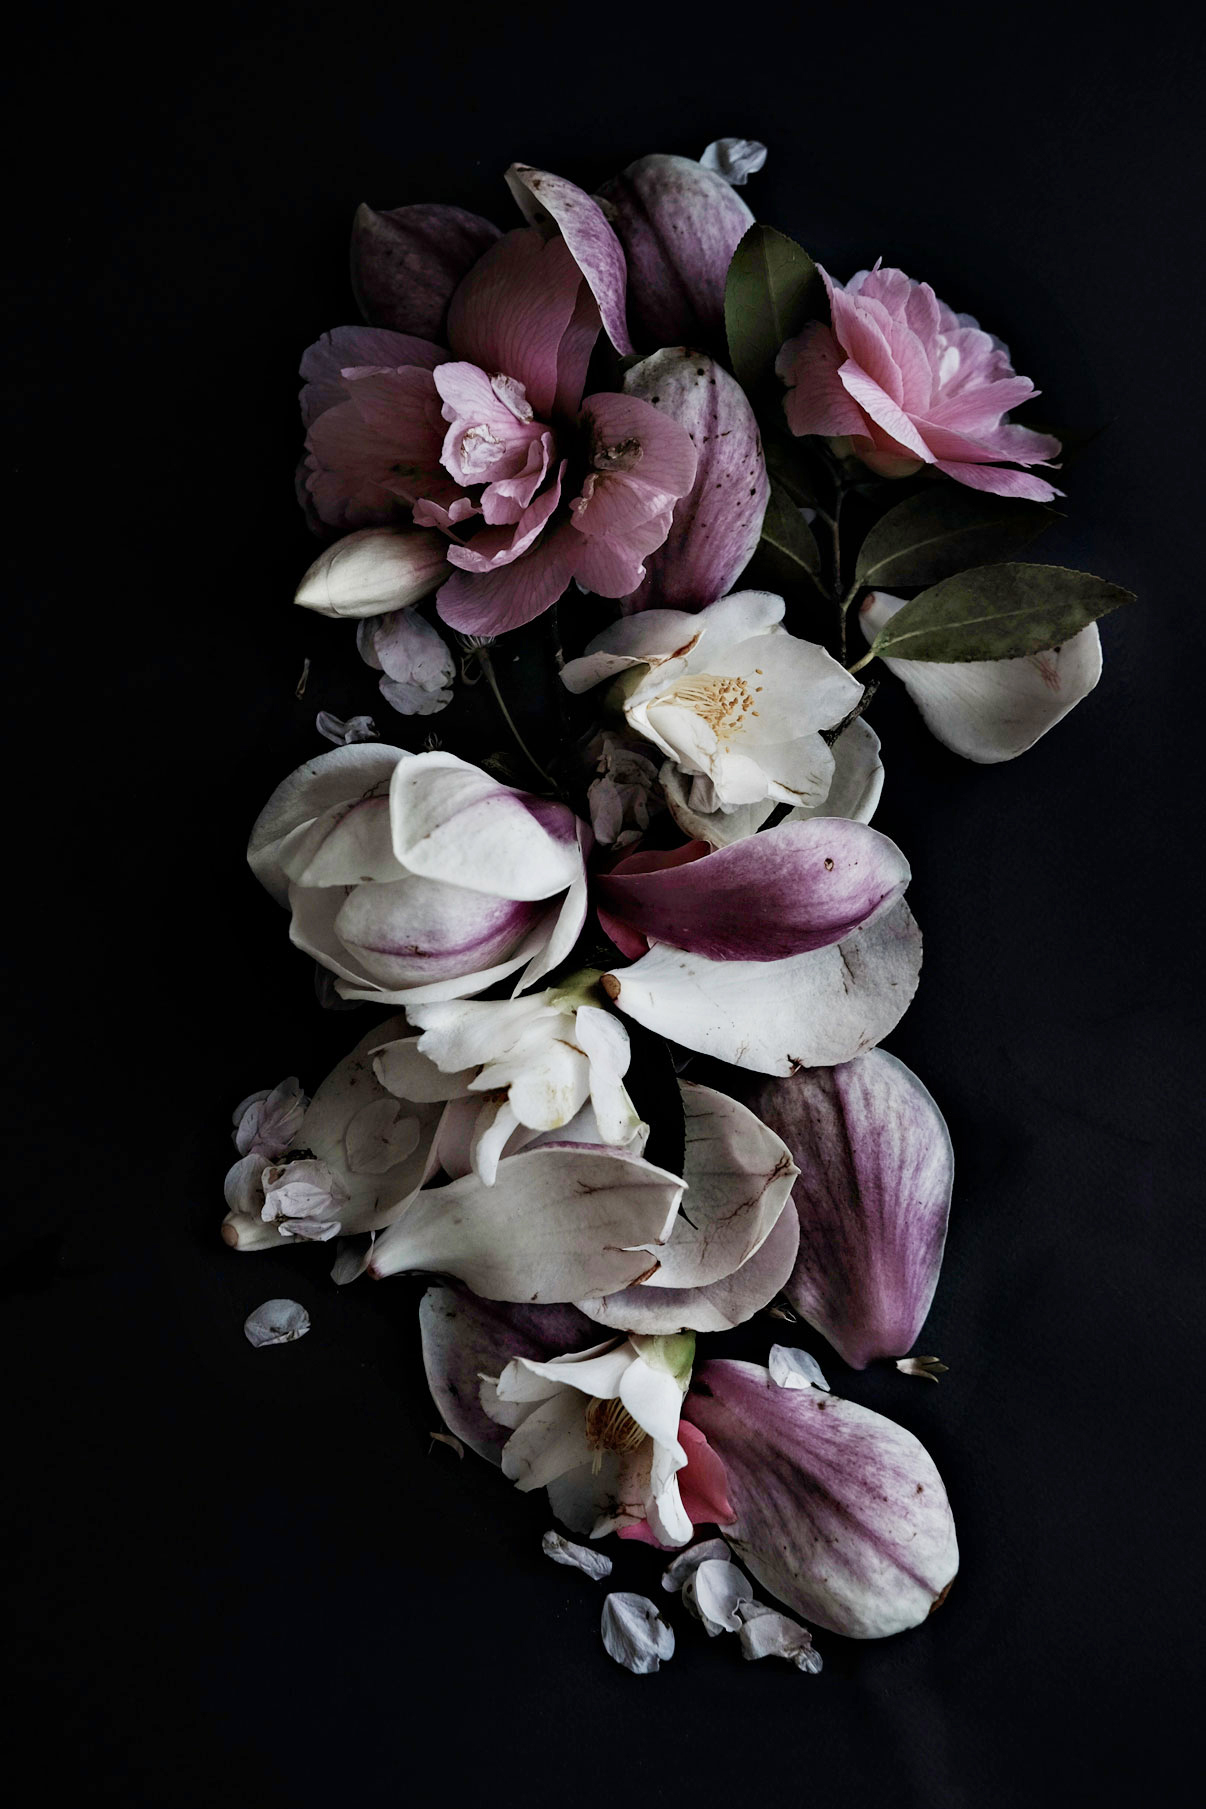 Foraged-flowers-by-Michelle-P.-edited-with-Foto-Rx-Modern-Moody-LR-presets-via-besottedblog